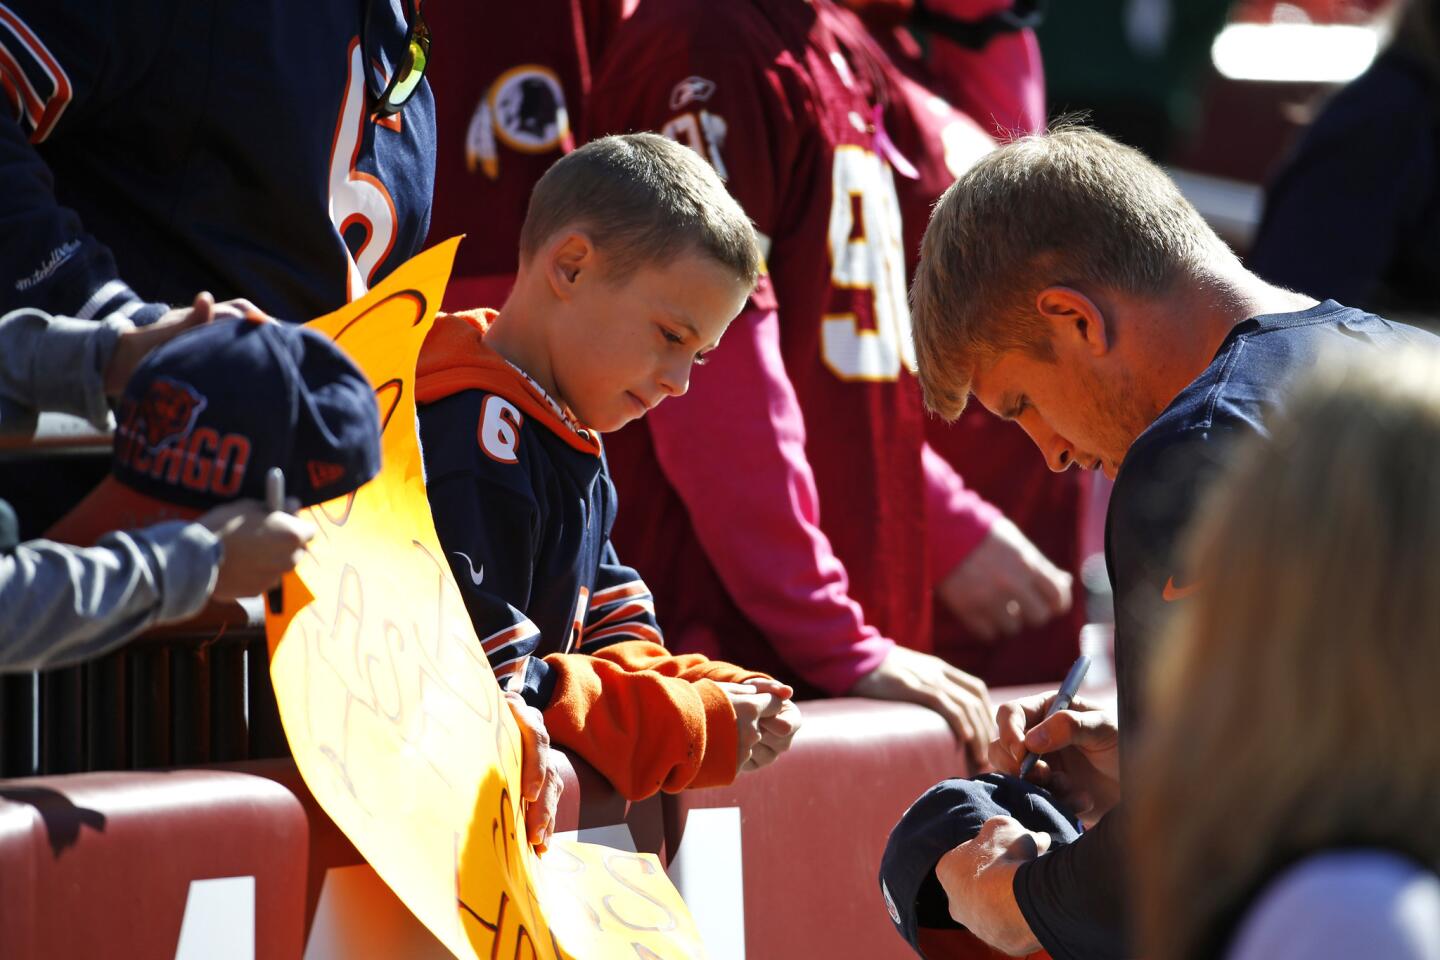 Chicago Bears defensive end Shea McClellin signs autographs prior to a game against the Washington Redskins at FedEx Field on Oct 20.